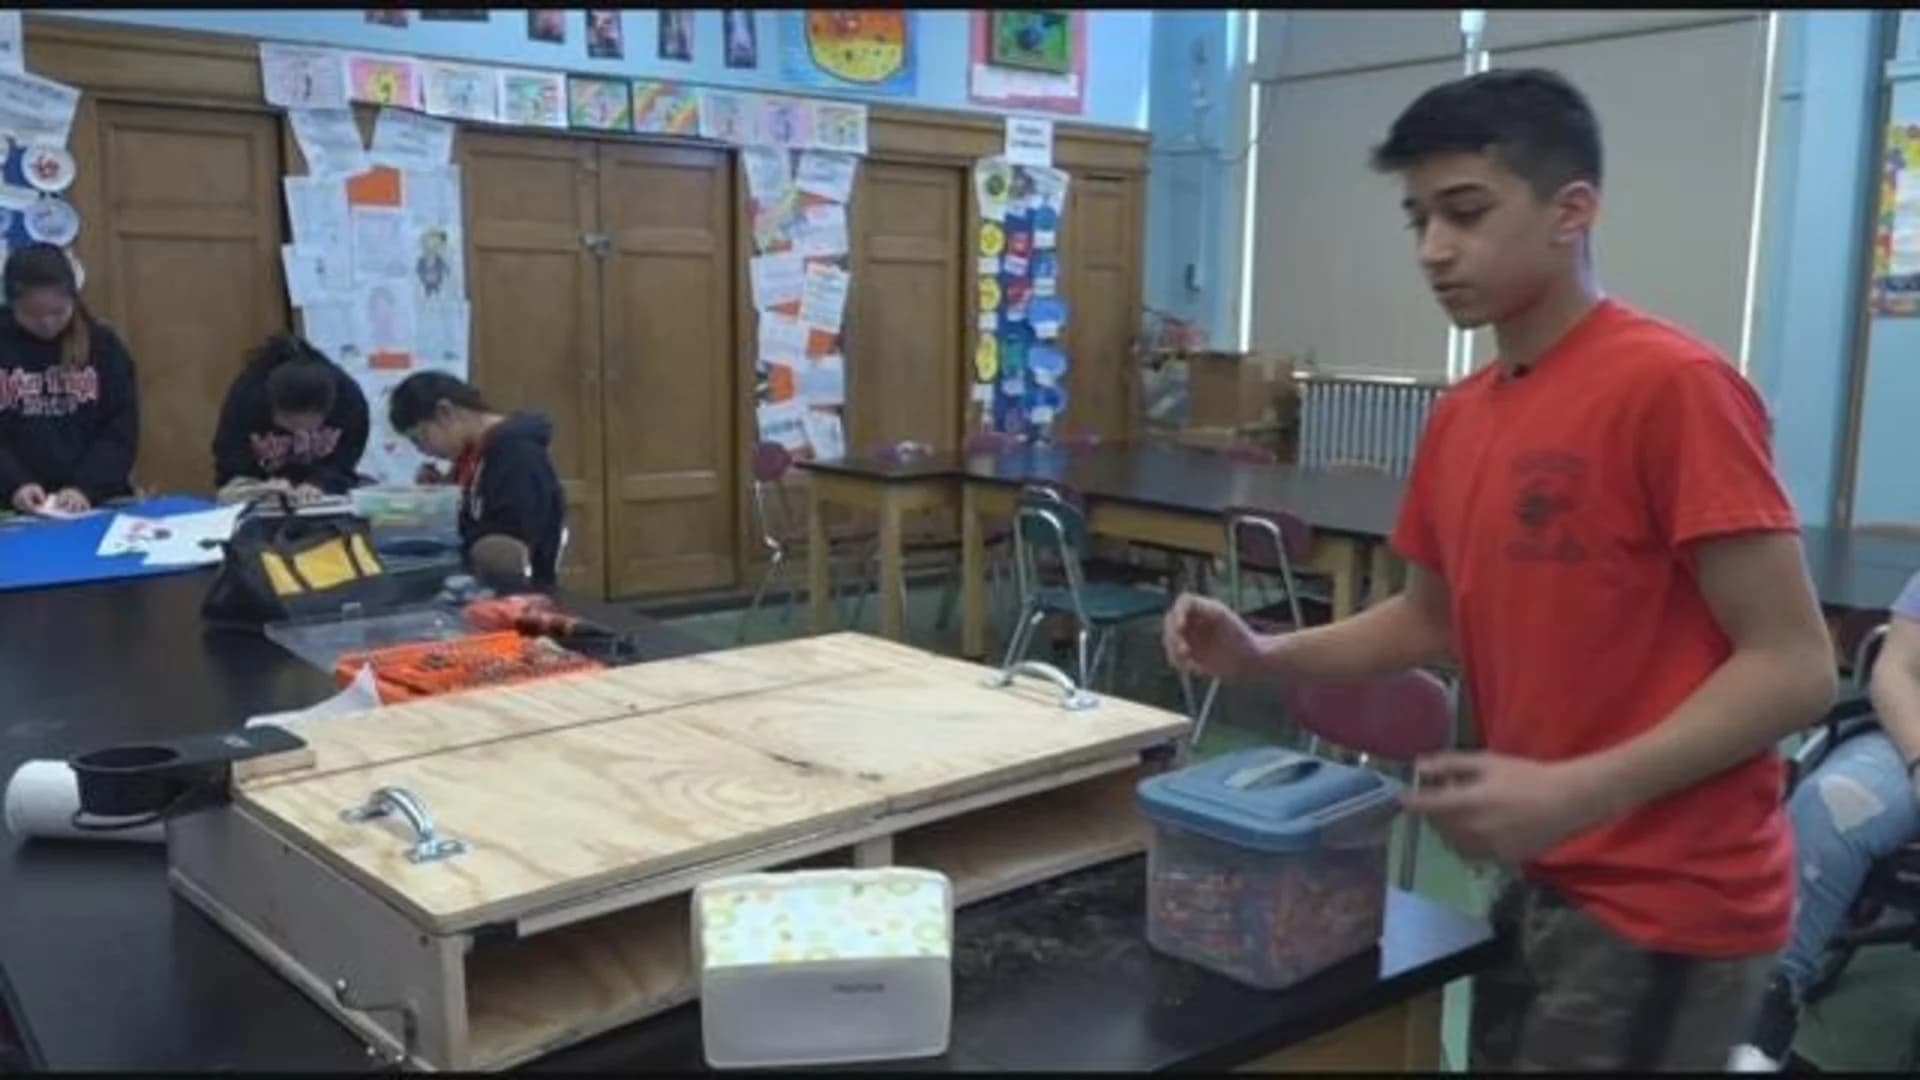 Students at Brooklyn school build wheelchair-accessible desk for classmate